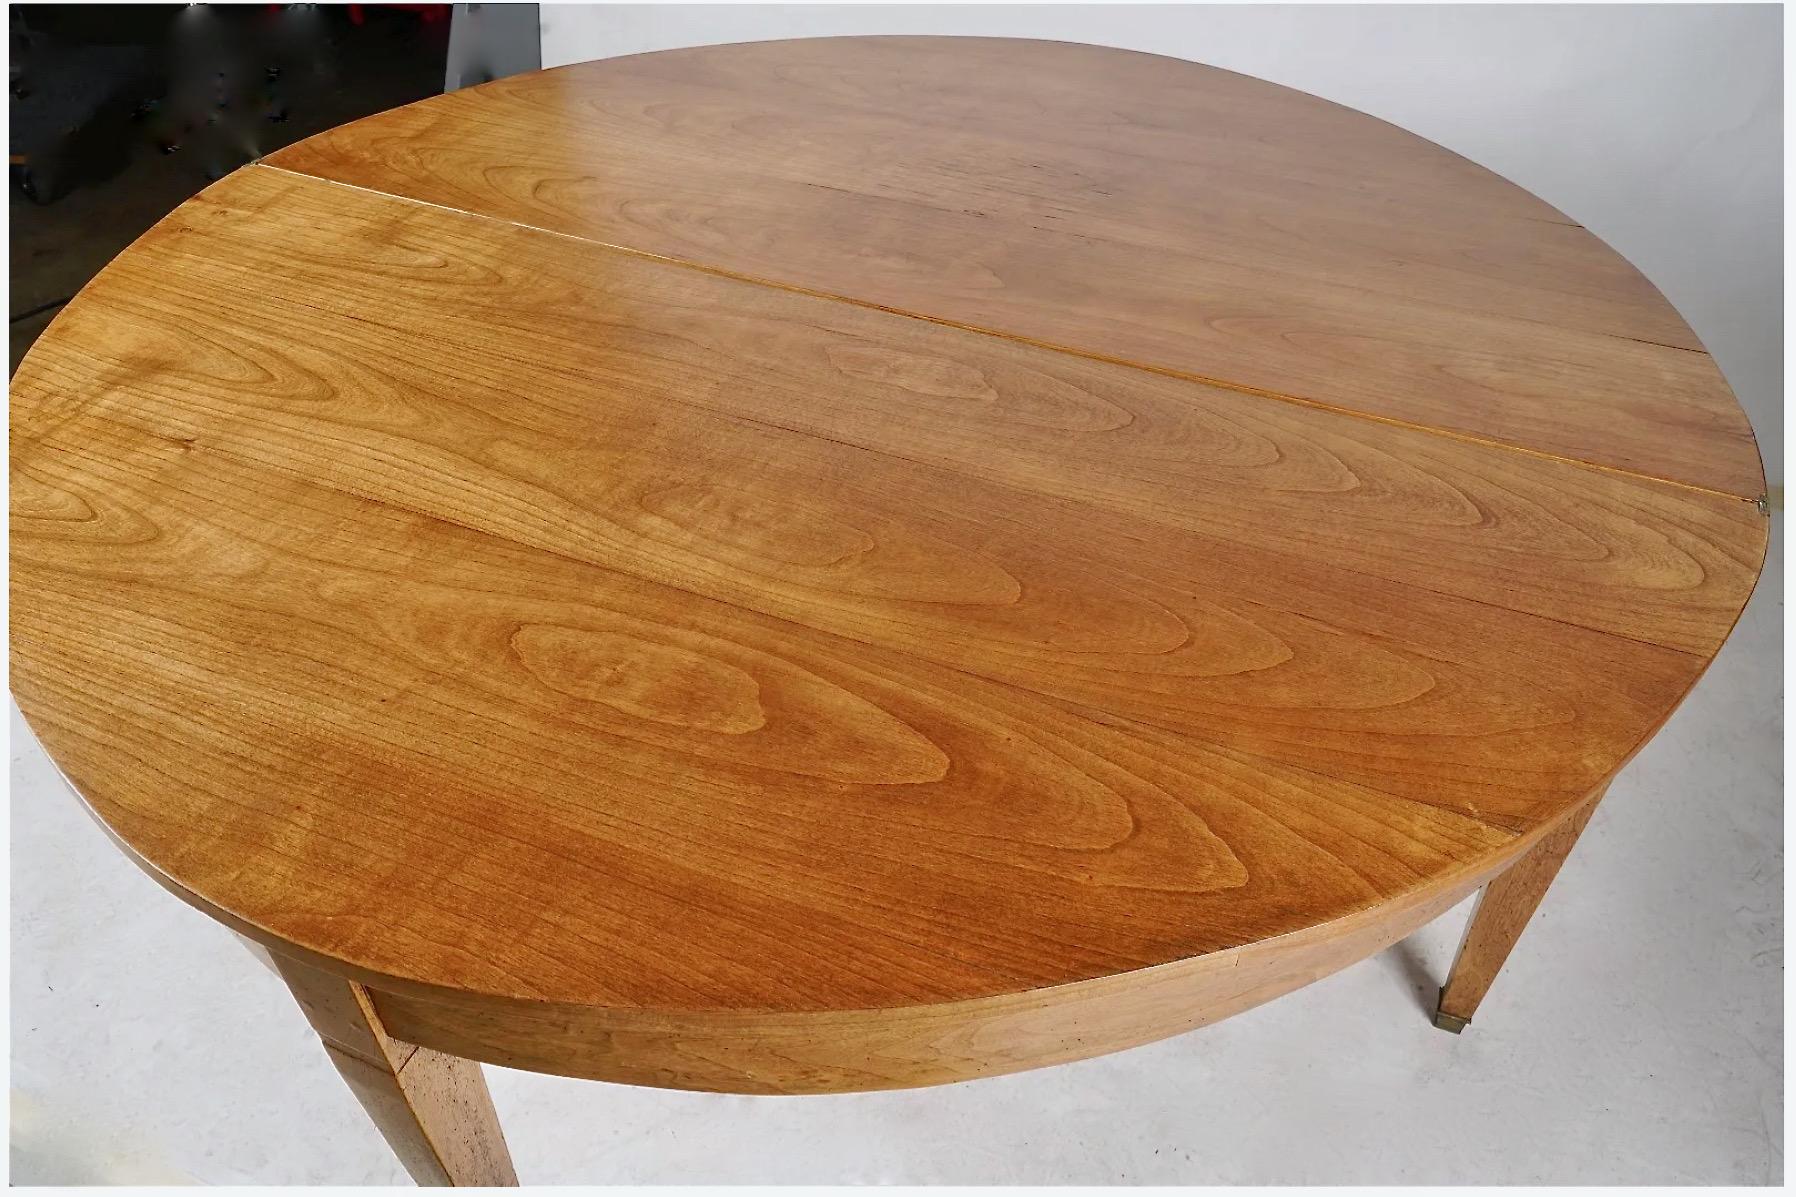 This is a great uncommonly large folder-over demilune dining table. The table is crafted of solid beautifully grained pearwood. The shaped legs terminate in their original brass caps; all five of the legs are in good condition with indications of